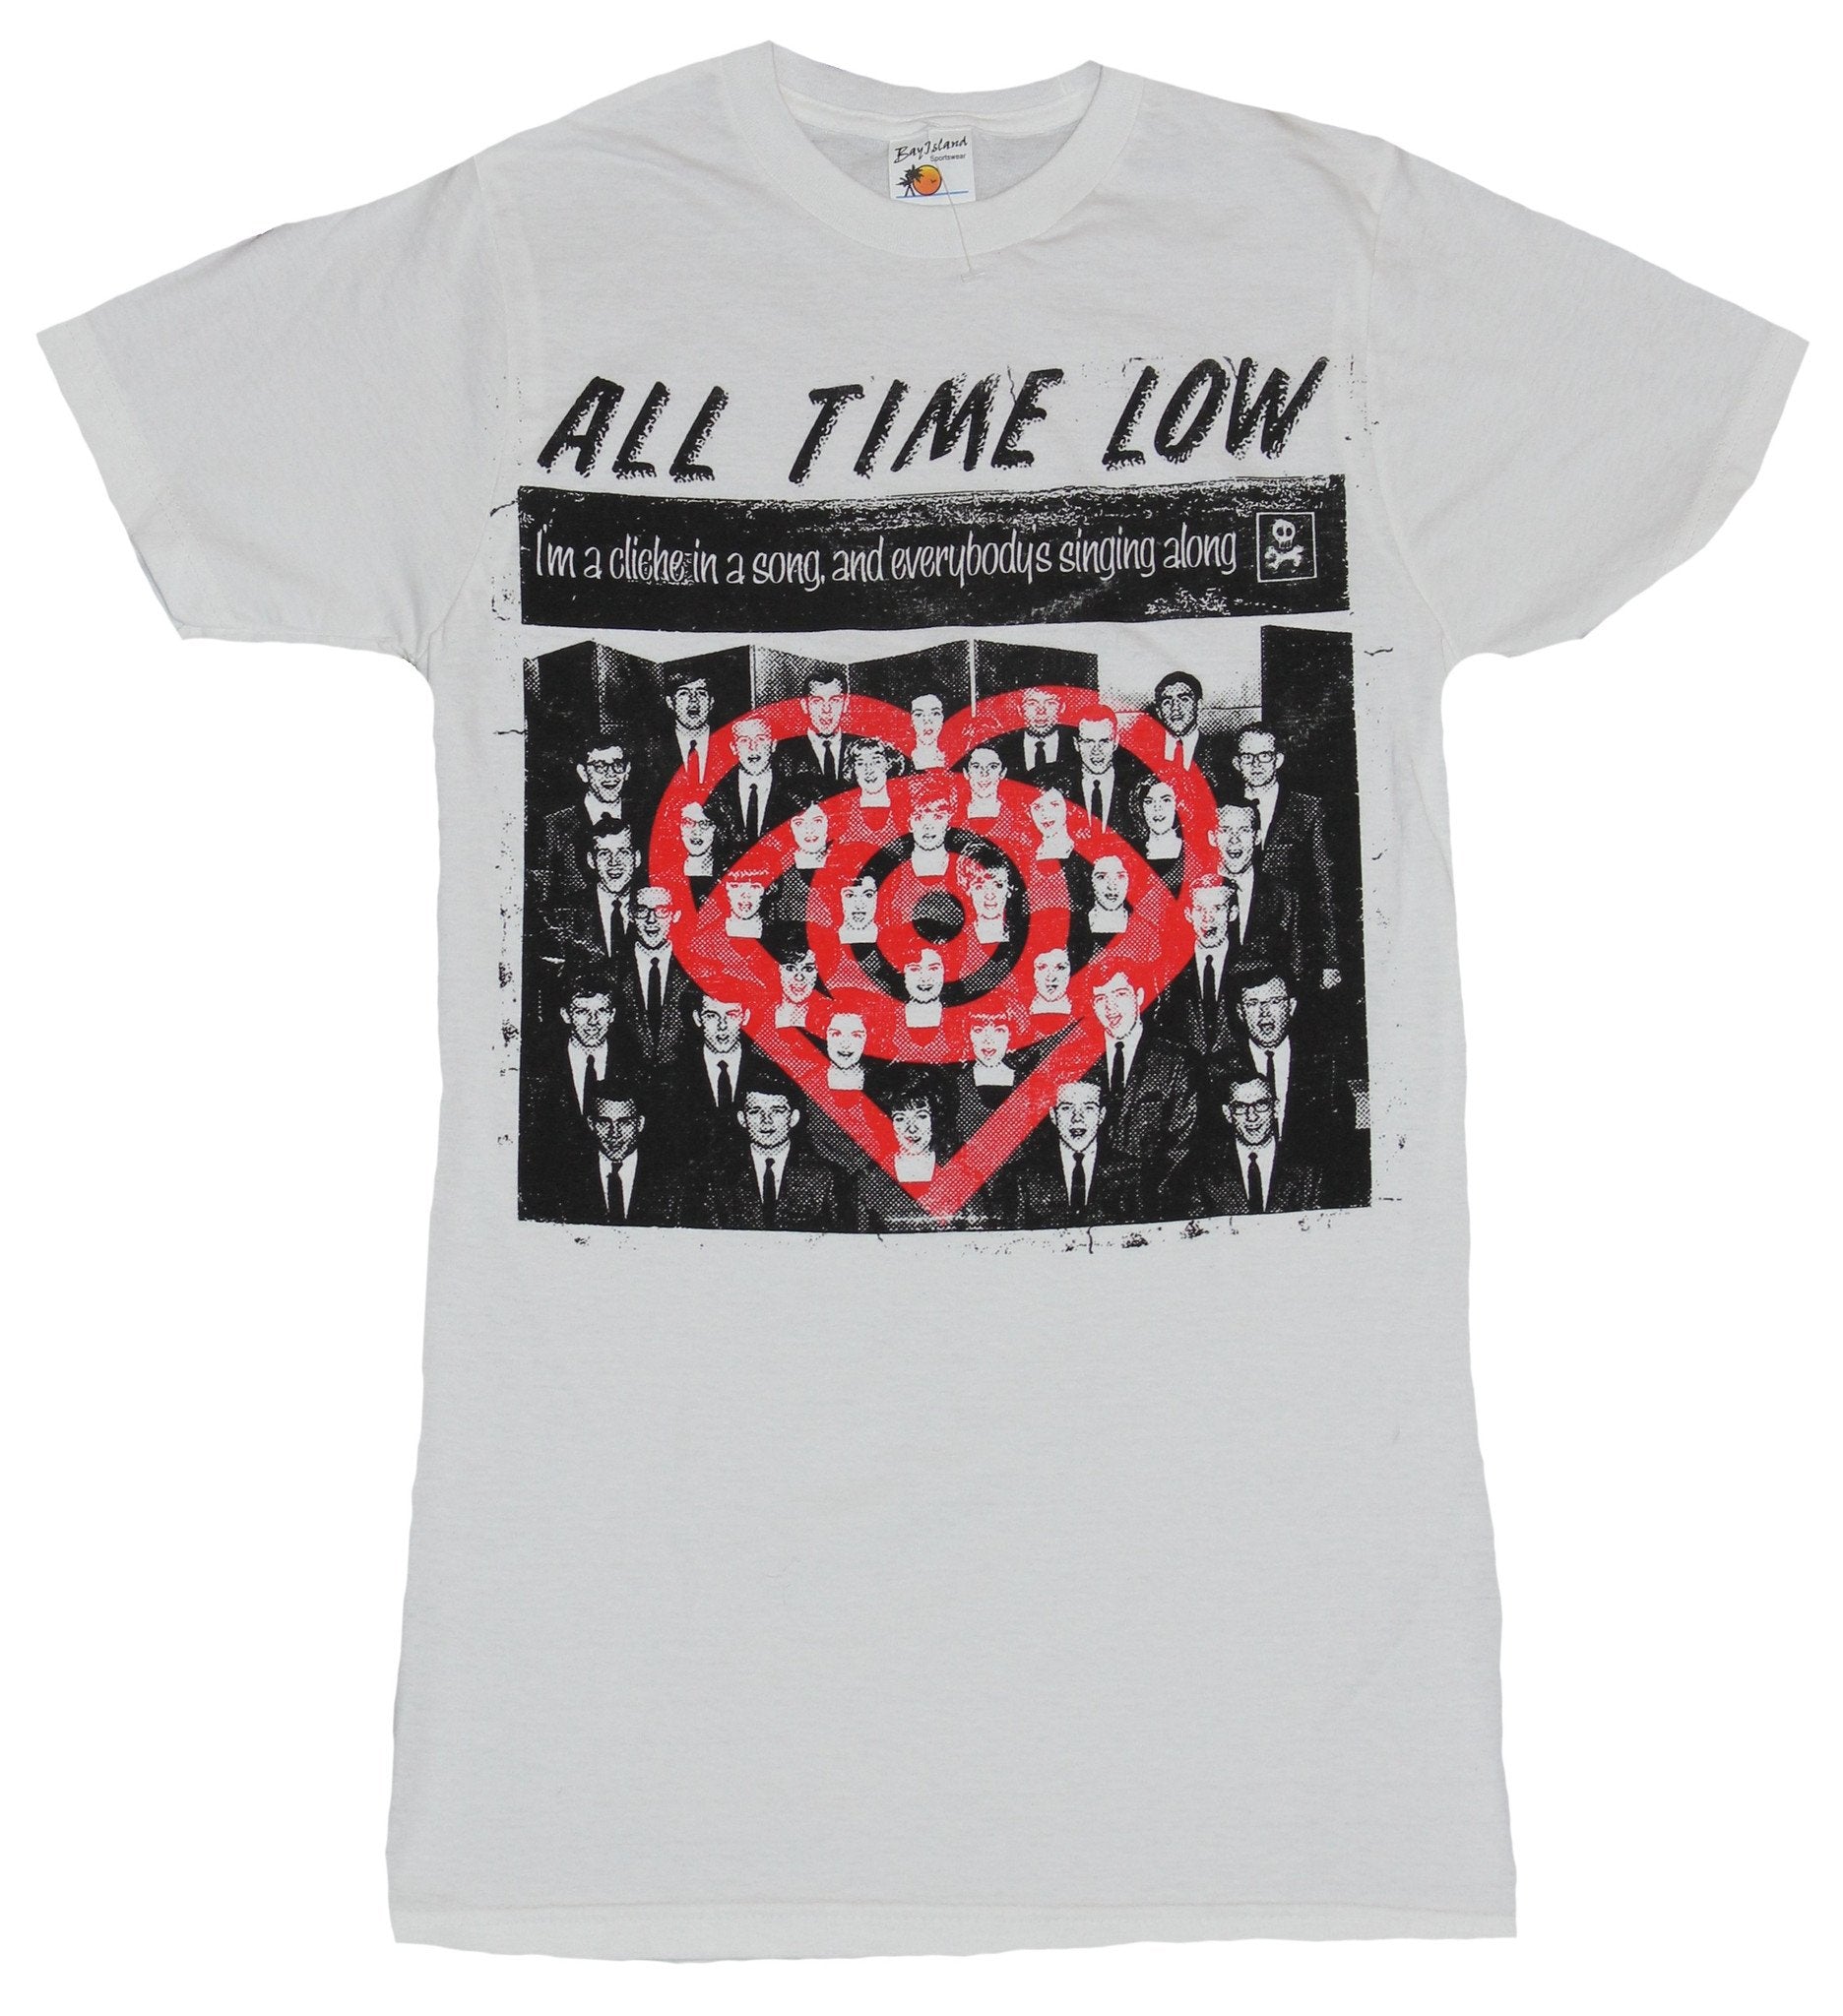 All Time Low Mens T-Shirt- I'm a ClichLogo Over People Photo Image